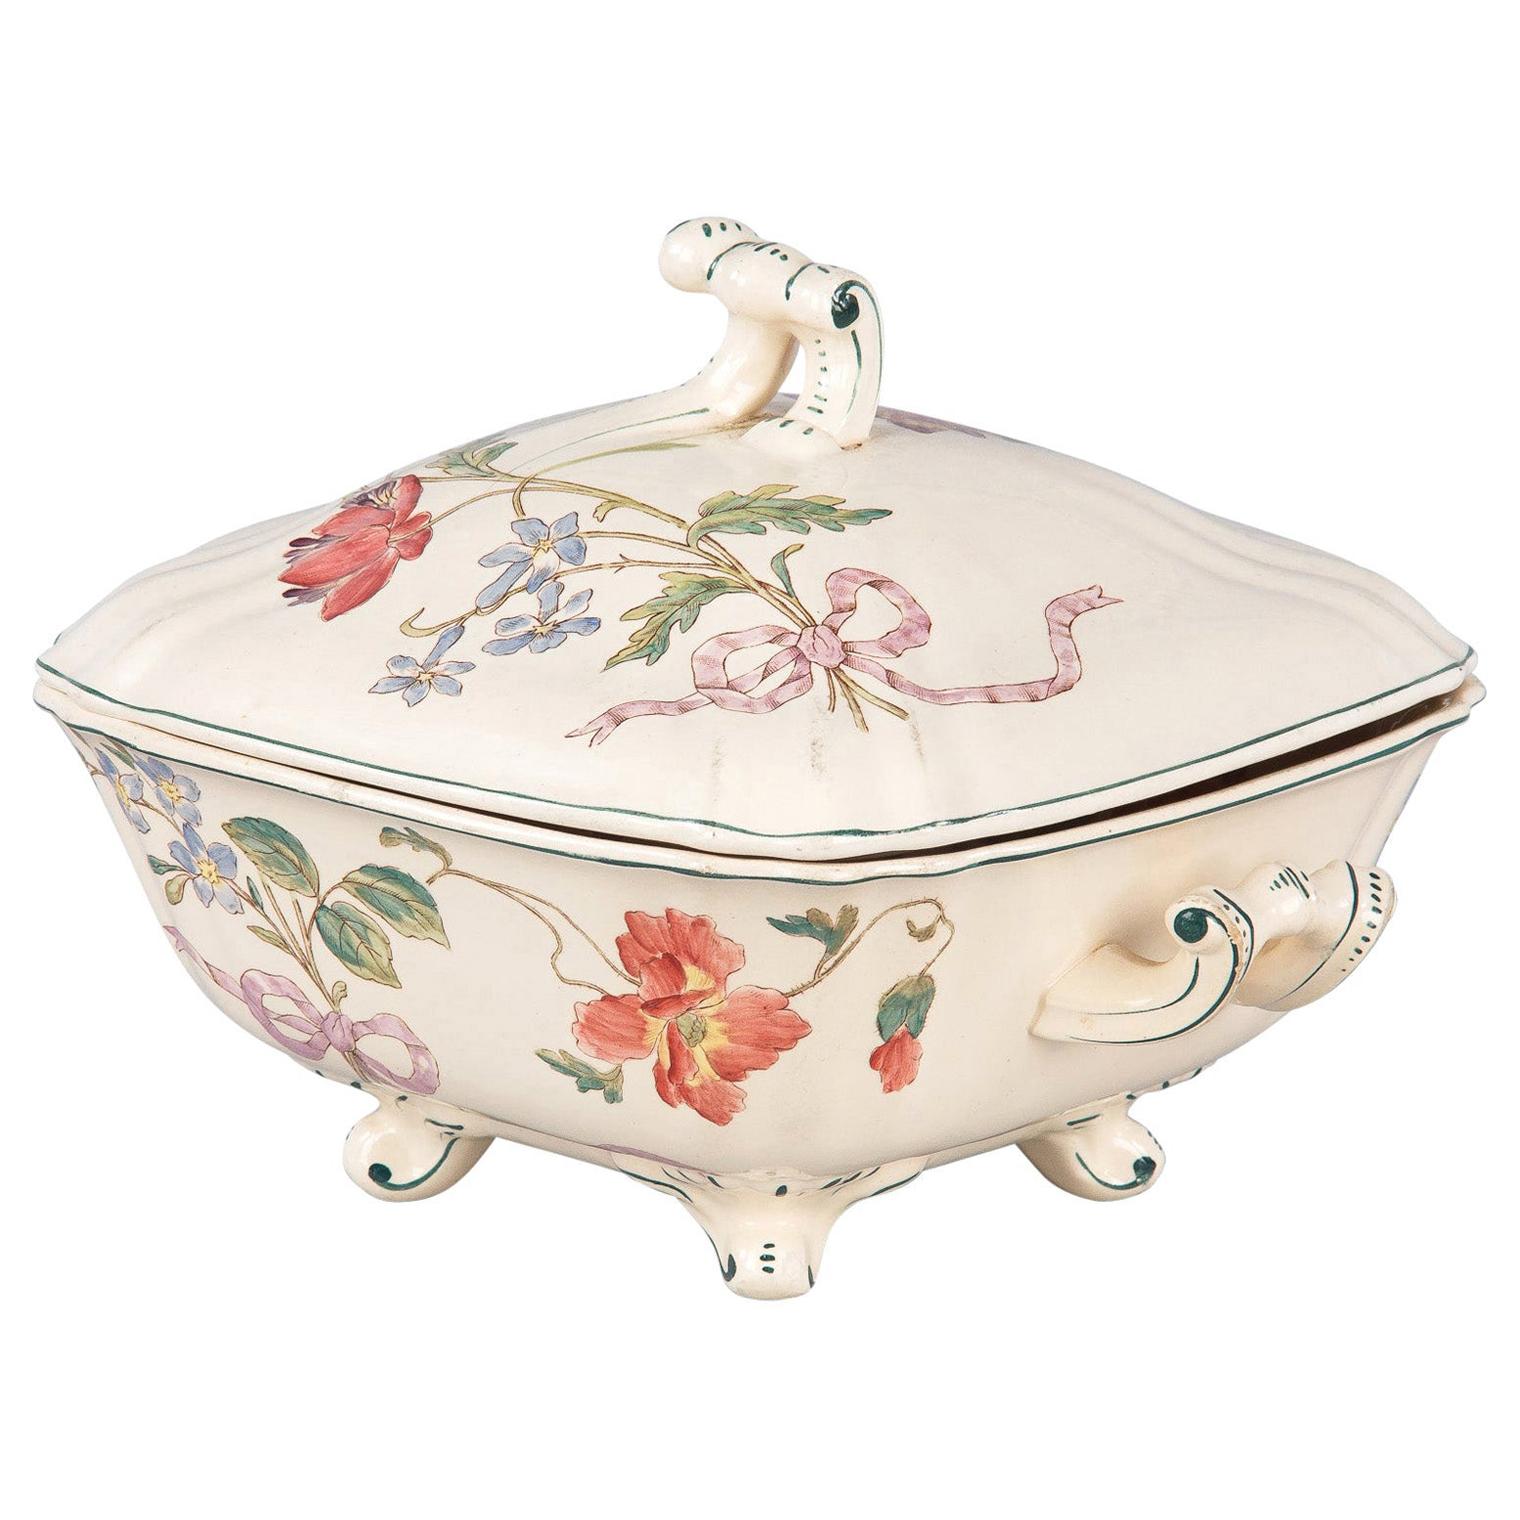 A vintage Longchamp ceramic tureen with hand painted flowers and ribbons. Raised on four scrolled feet, the faience piece has a square form with scrolled handles and a scrolled handle atop the lid. Both lid and tureen have subtly scalloped corners.